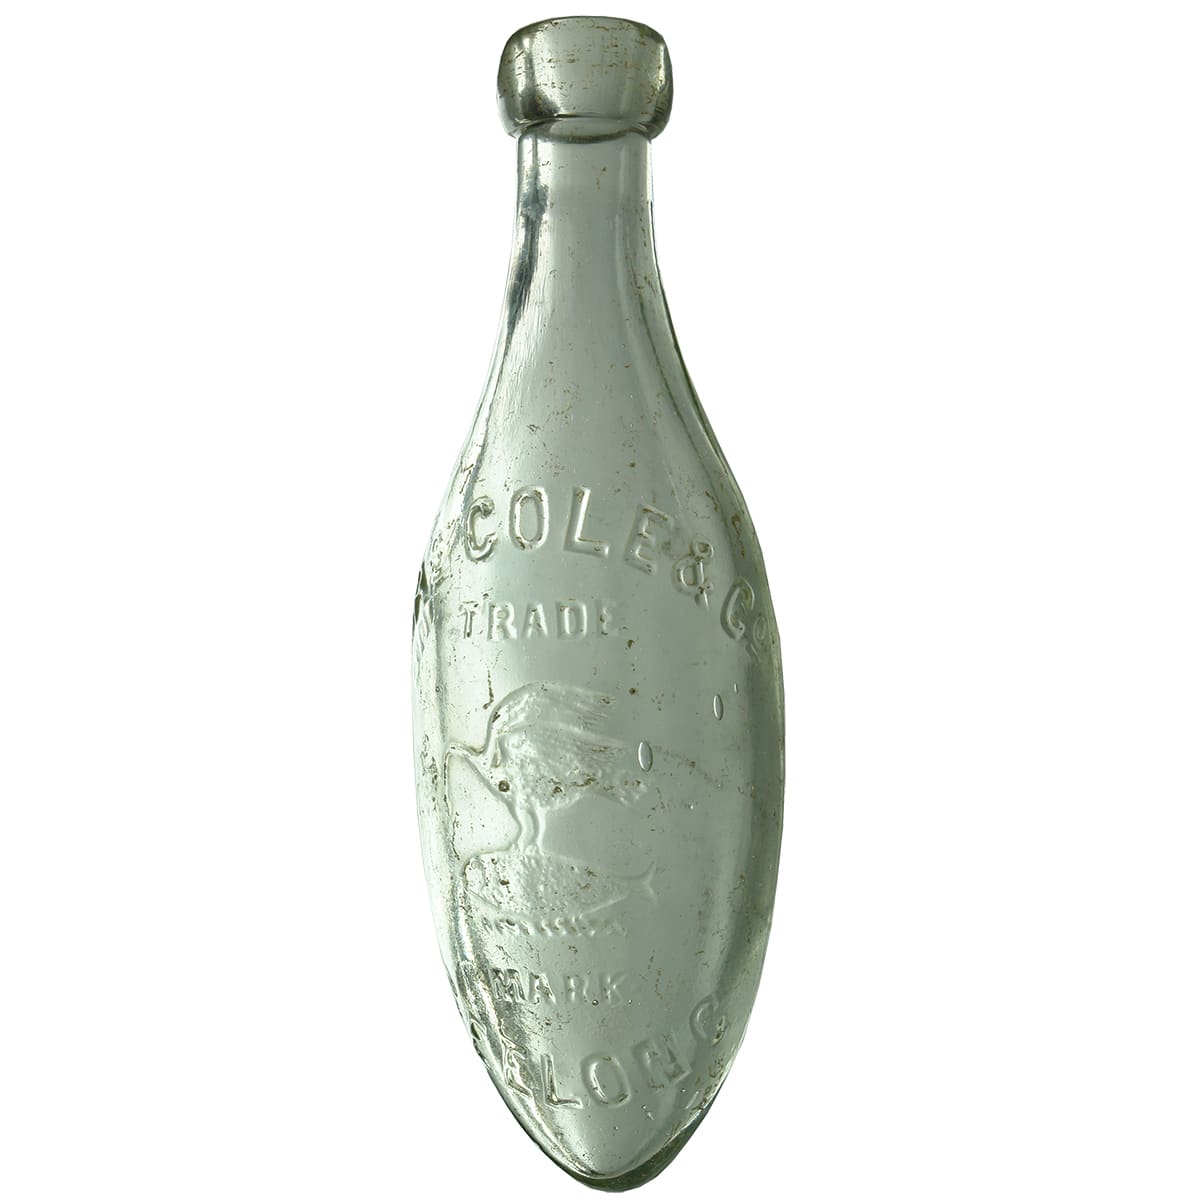 Torpedo. Chas Cole & Co., Geelong. Clear. 10 oz.